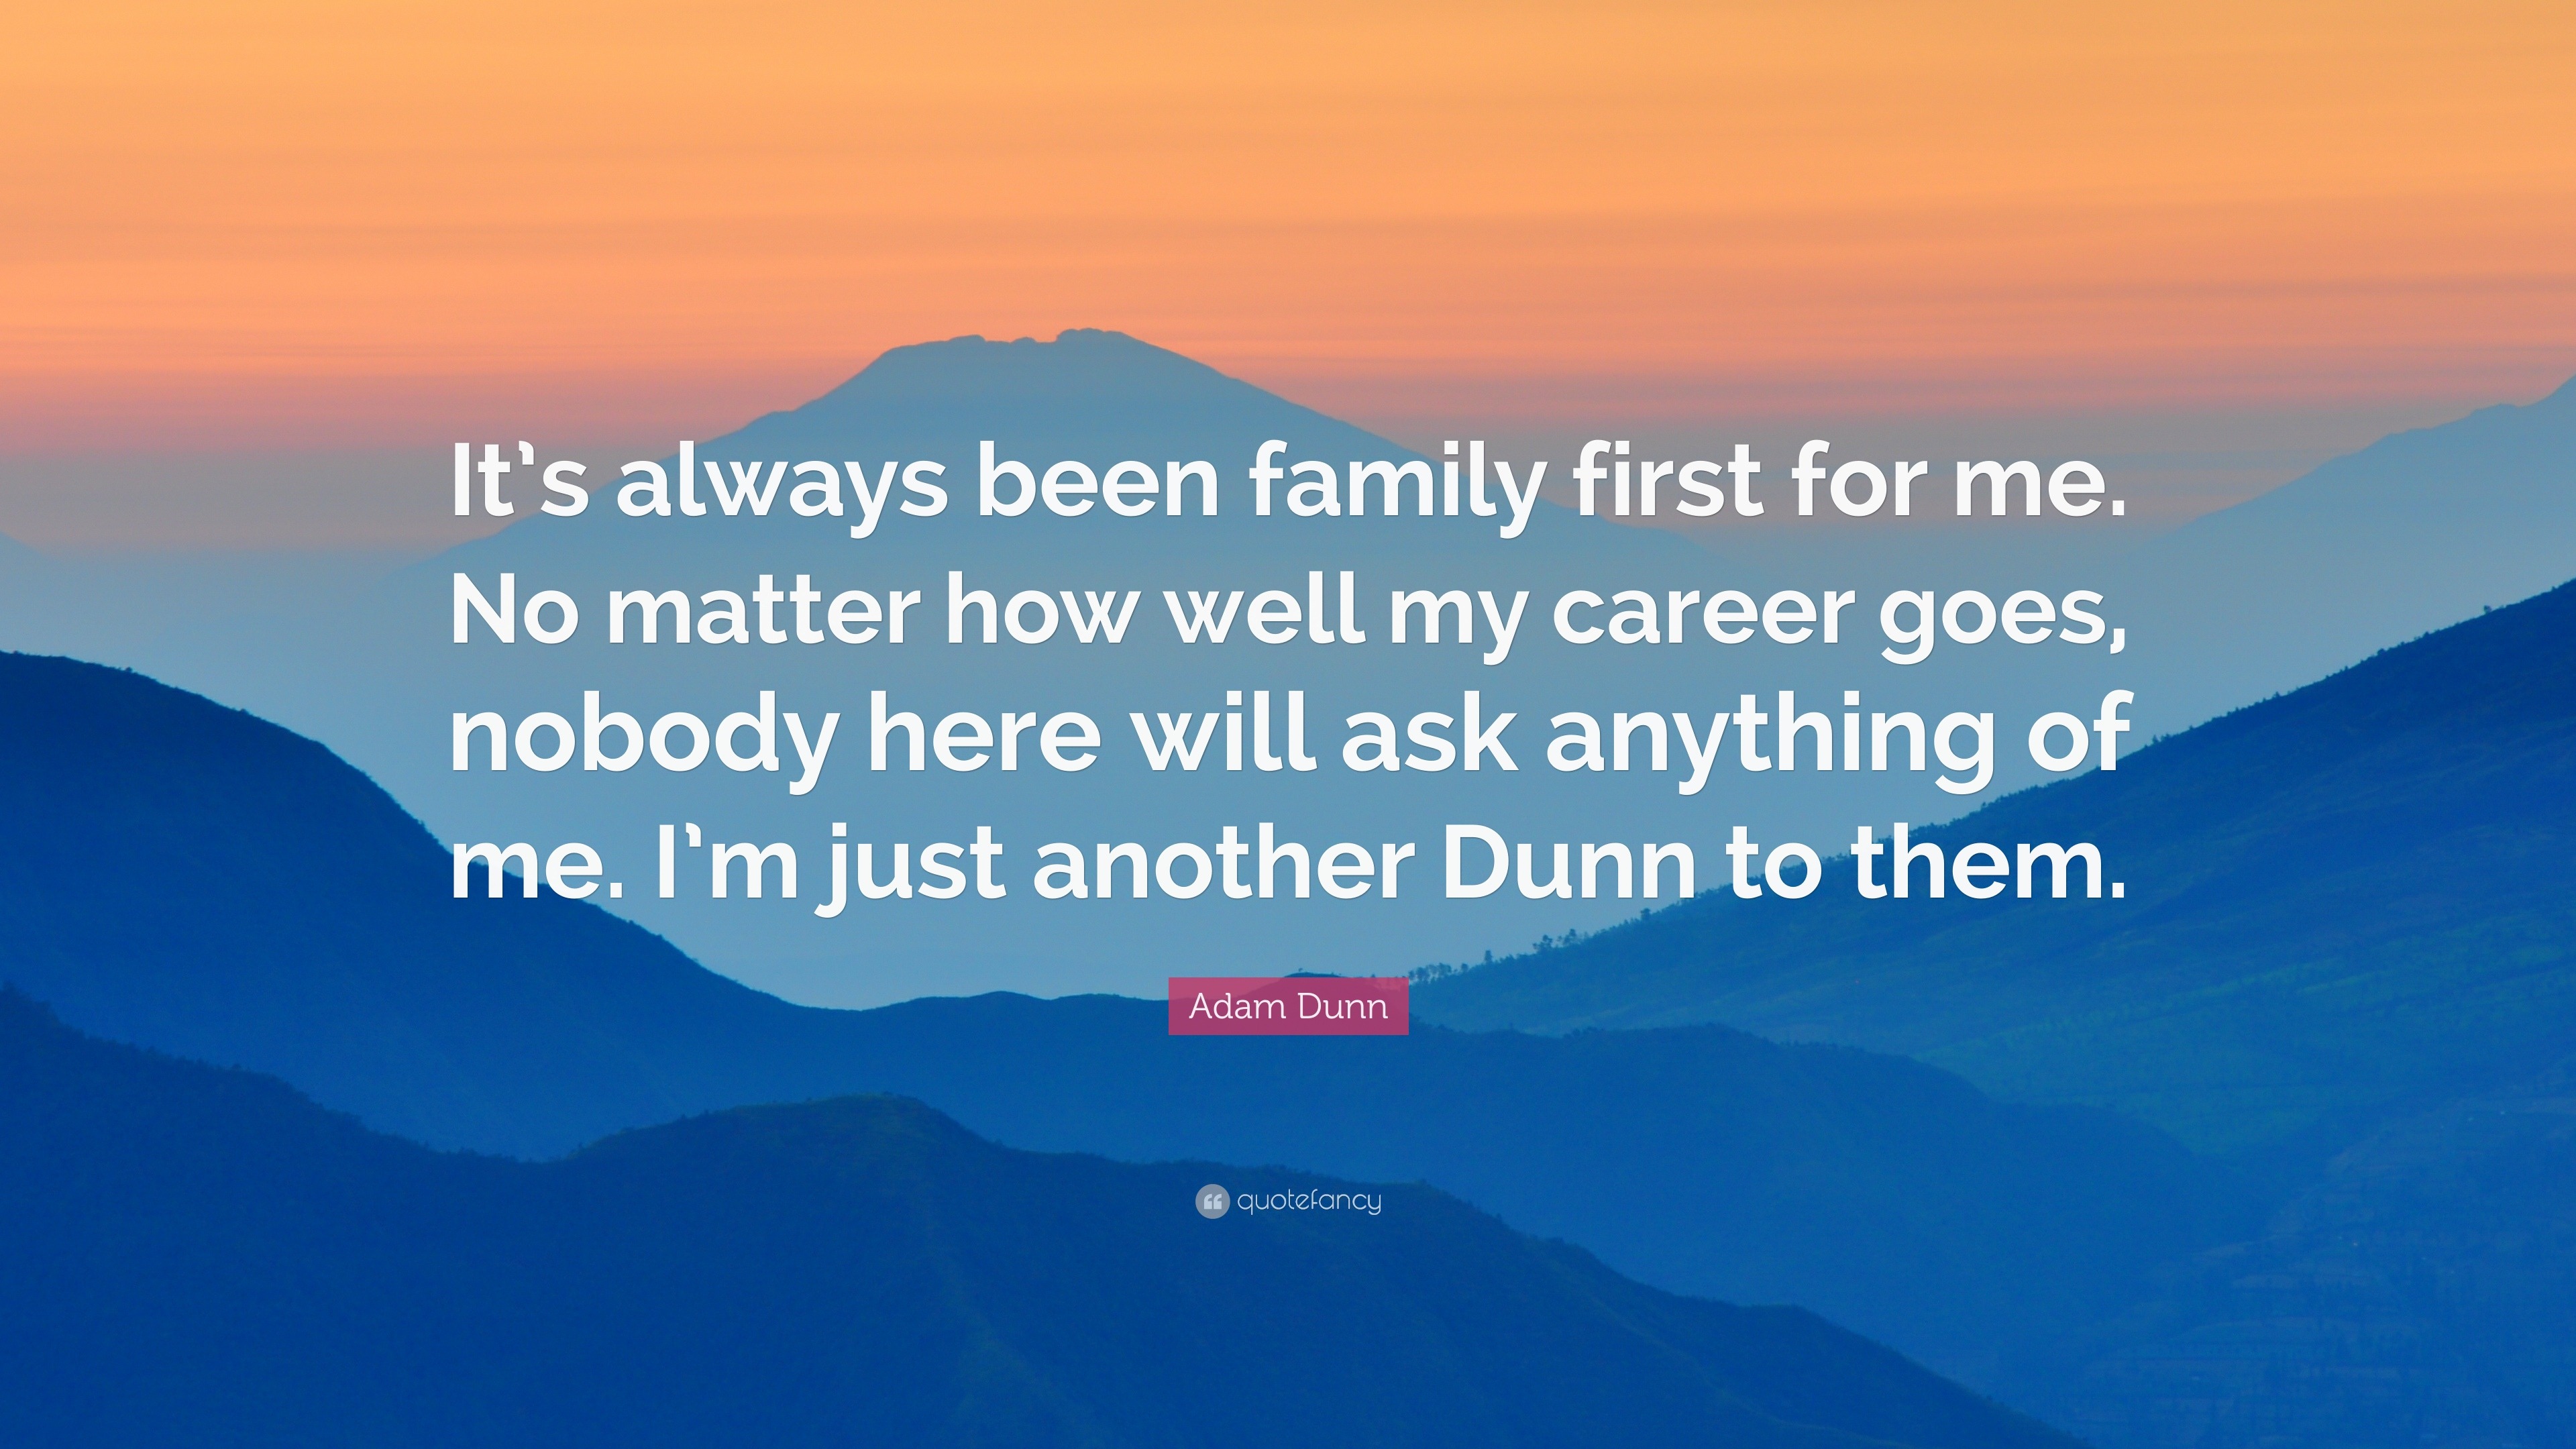 Adam Dunn Quote: “It's always been family first for me. No matter